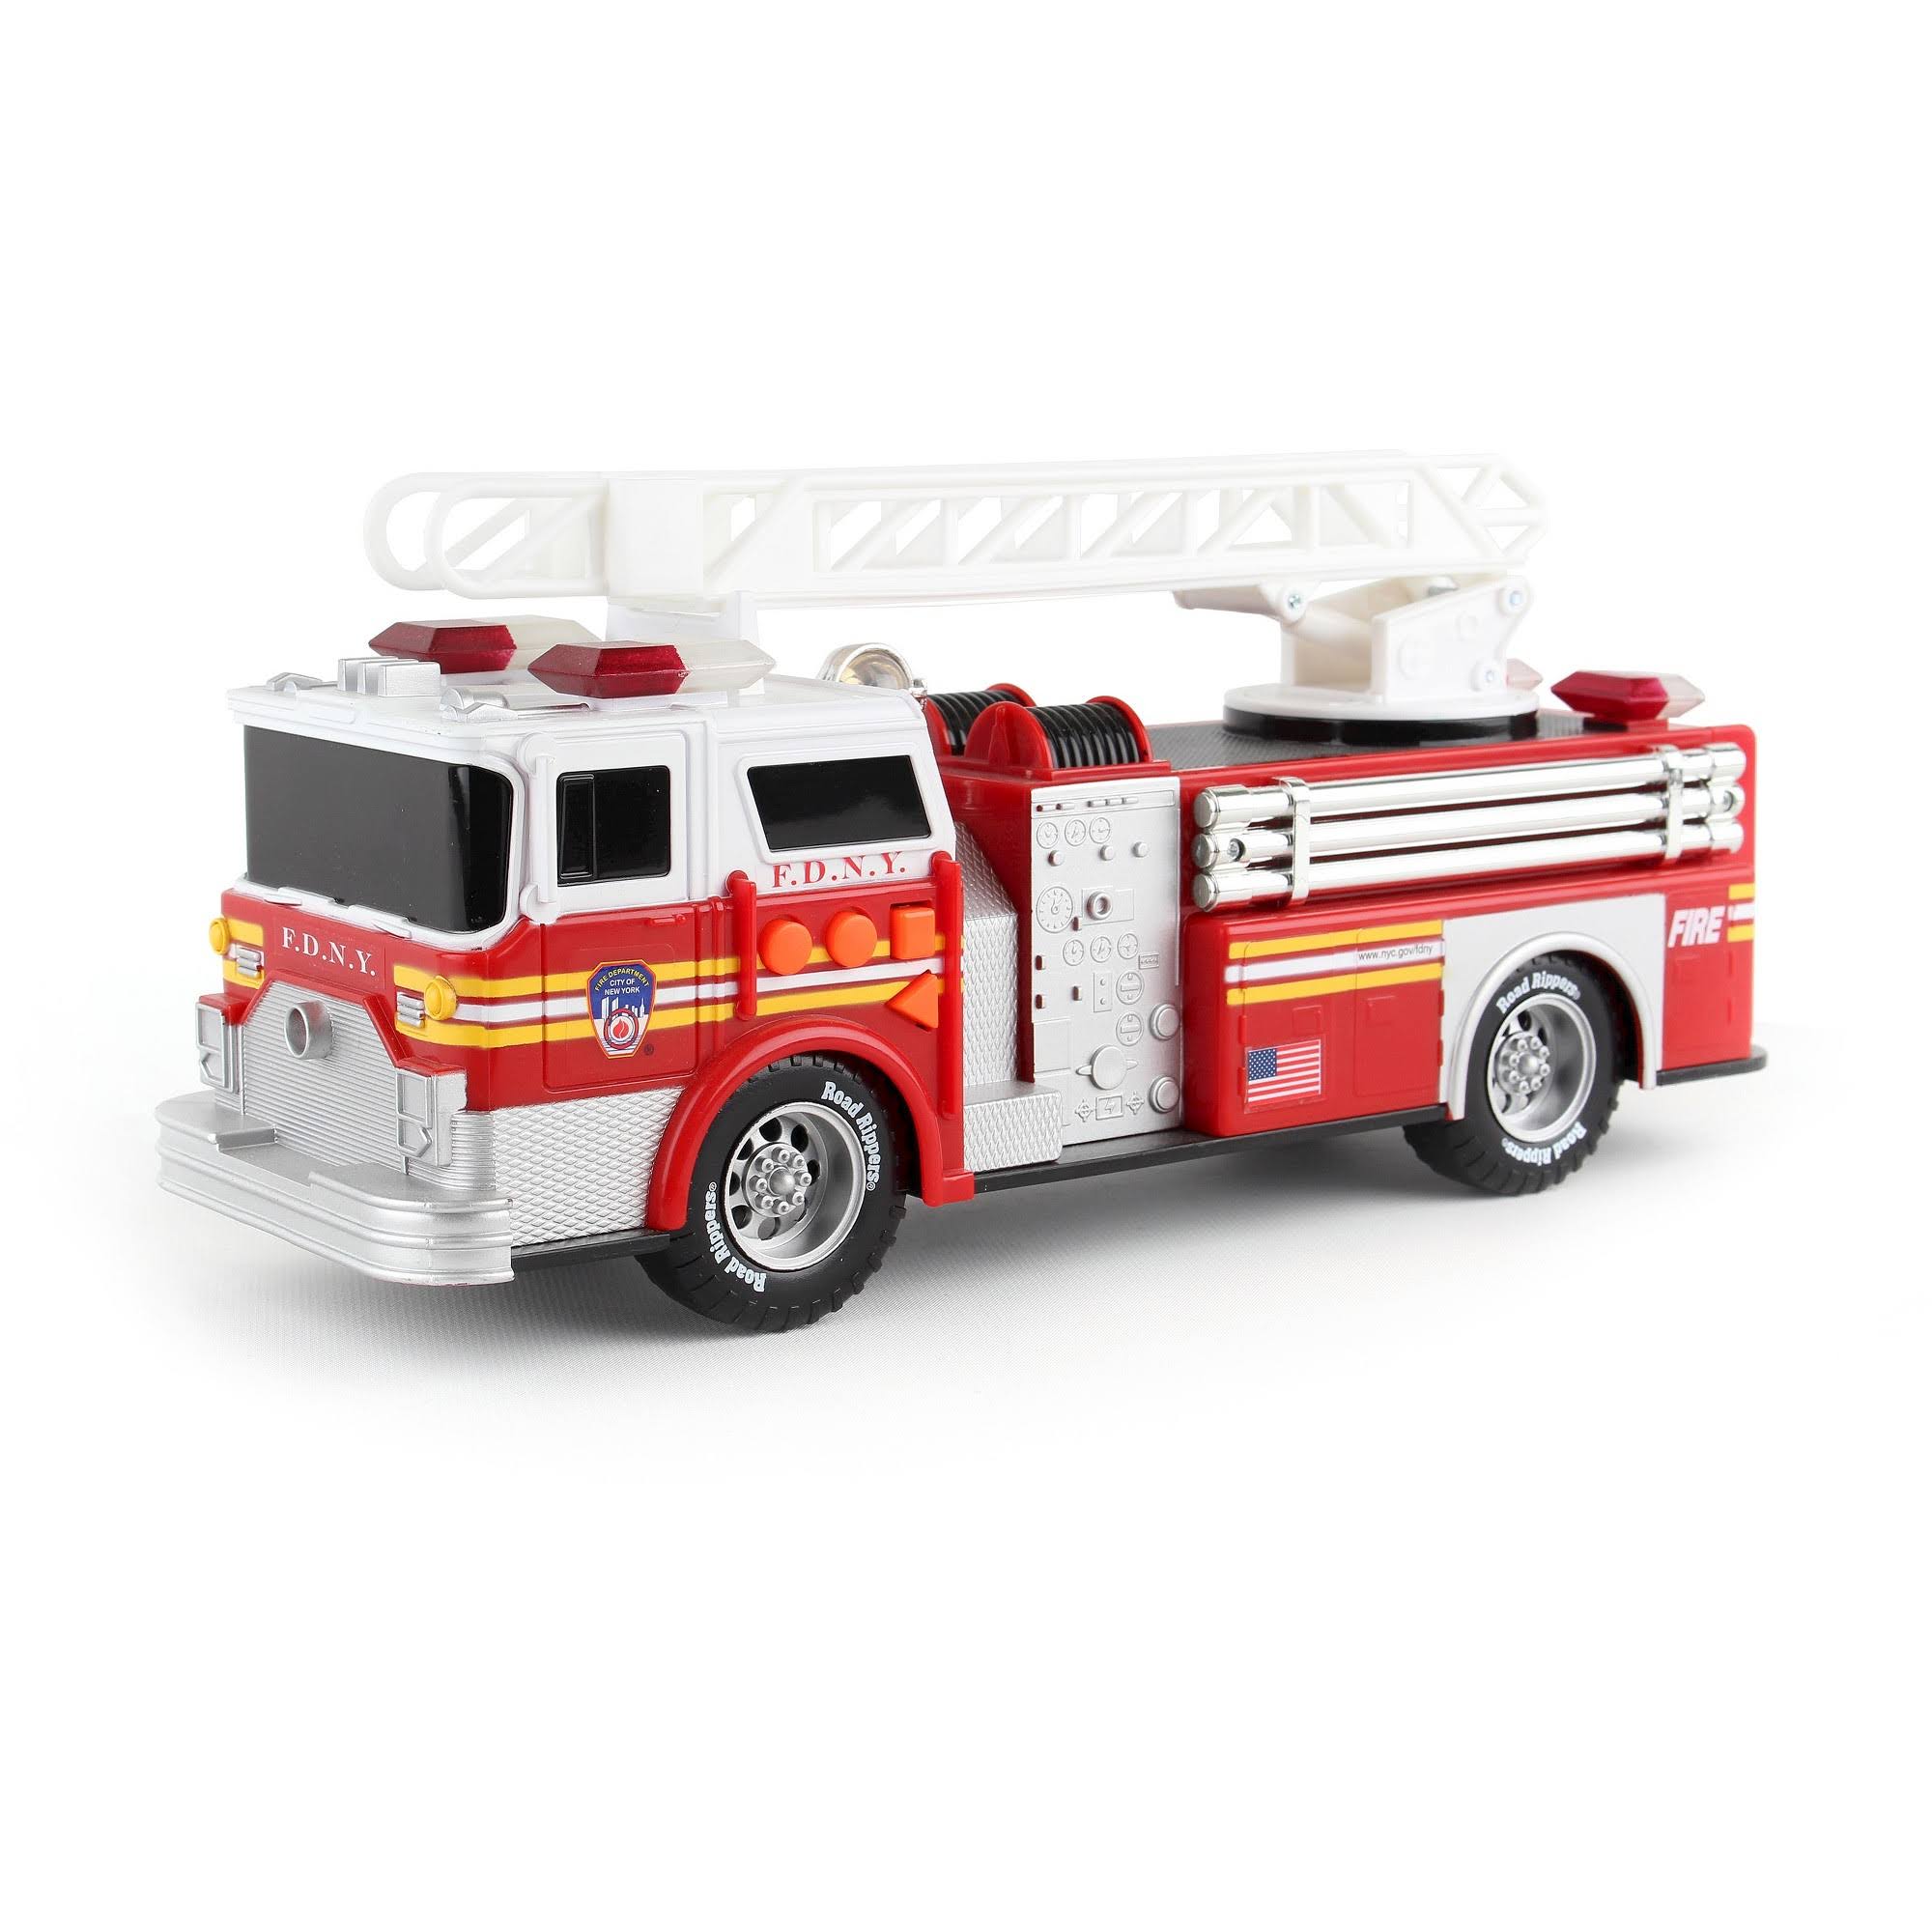 Fdny Motorized Ladder Truck with Lights & Sound